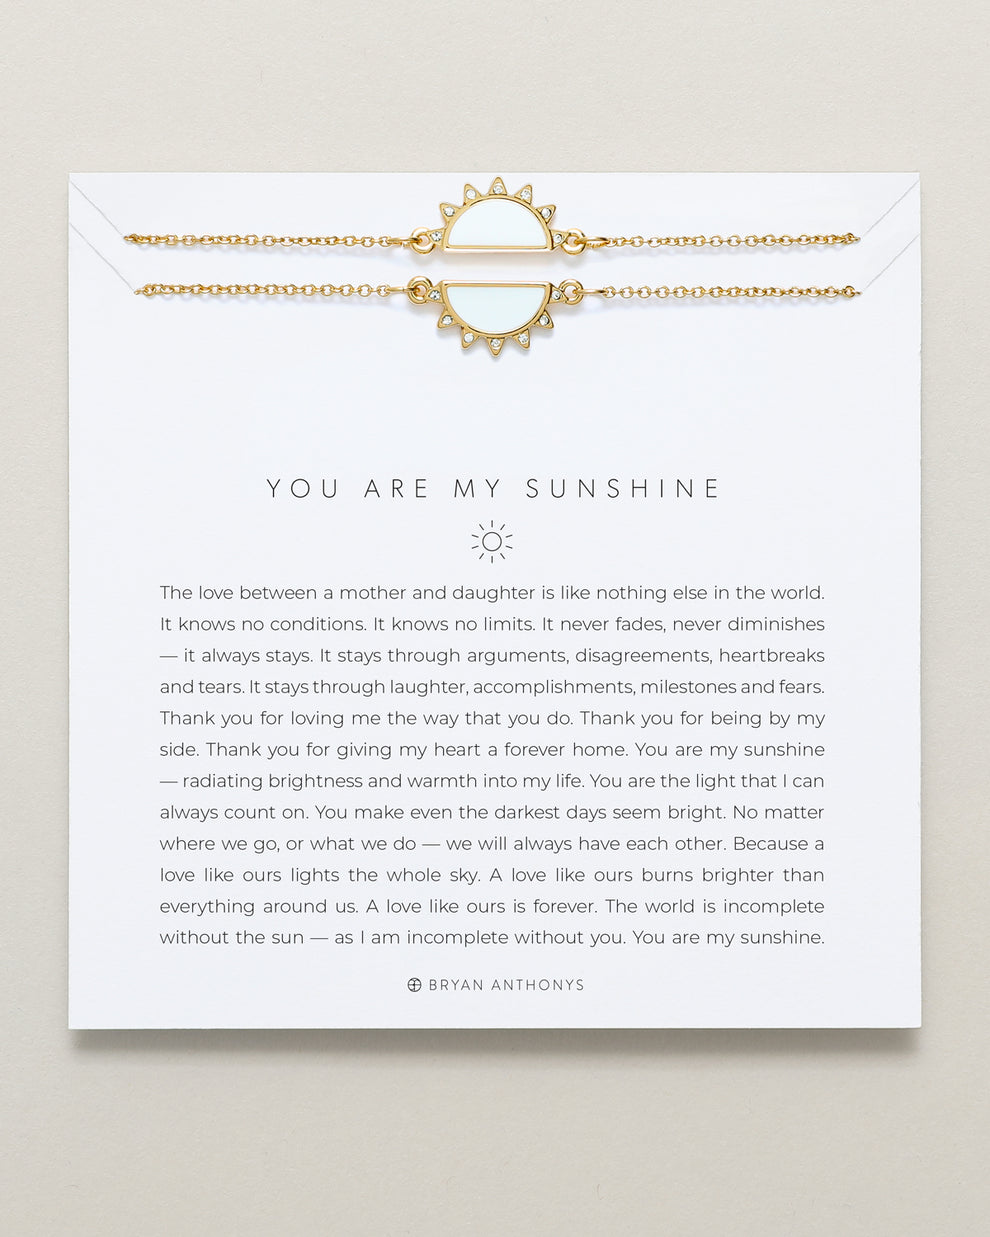 Bryan Anthonys "You Are My Sunshine" Necklace Set-Gold